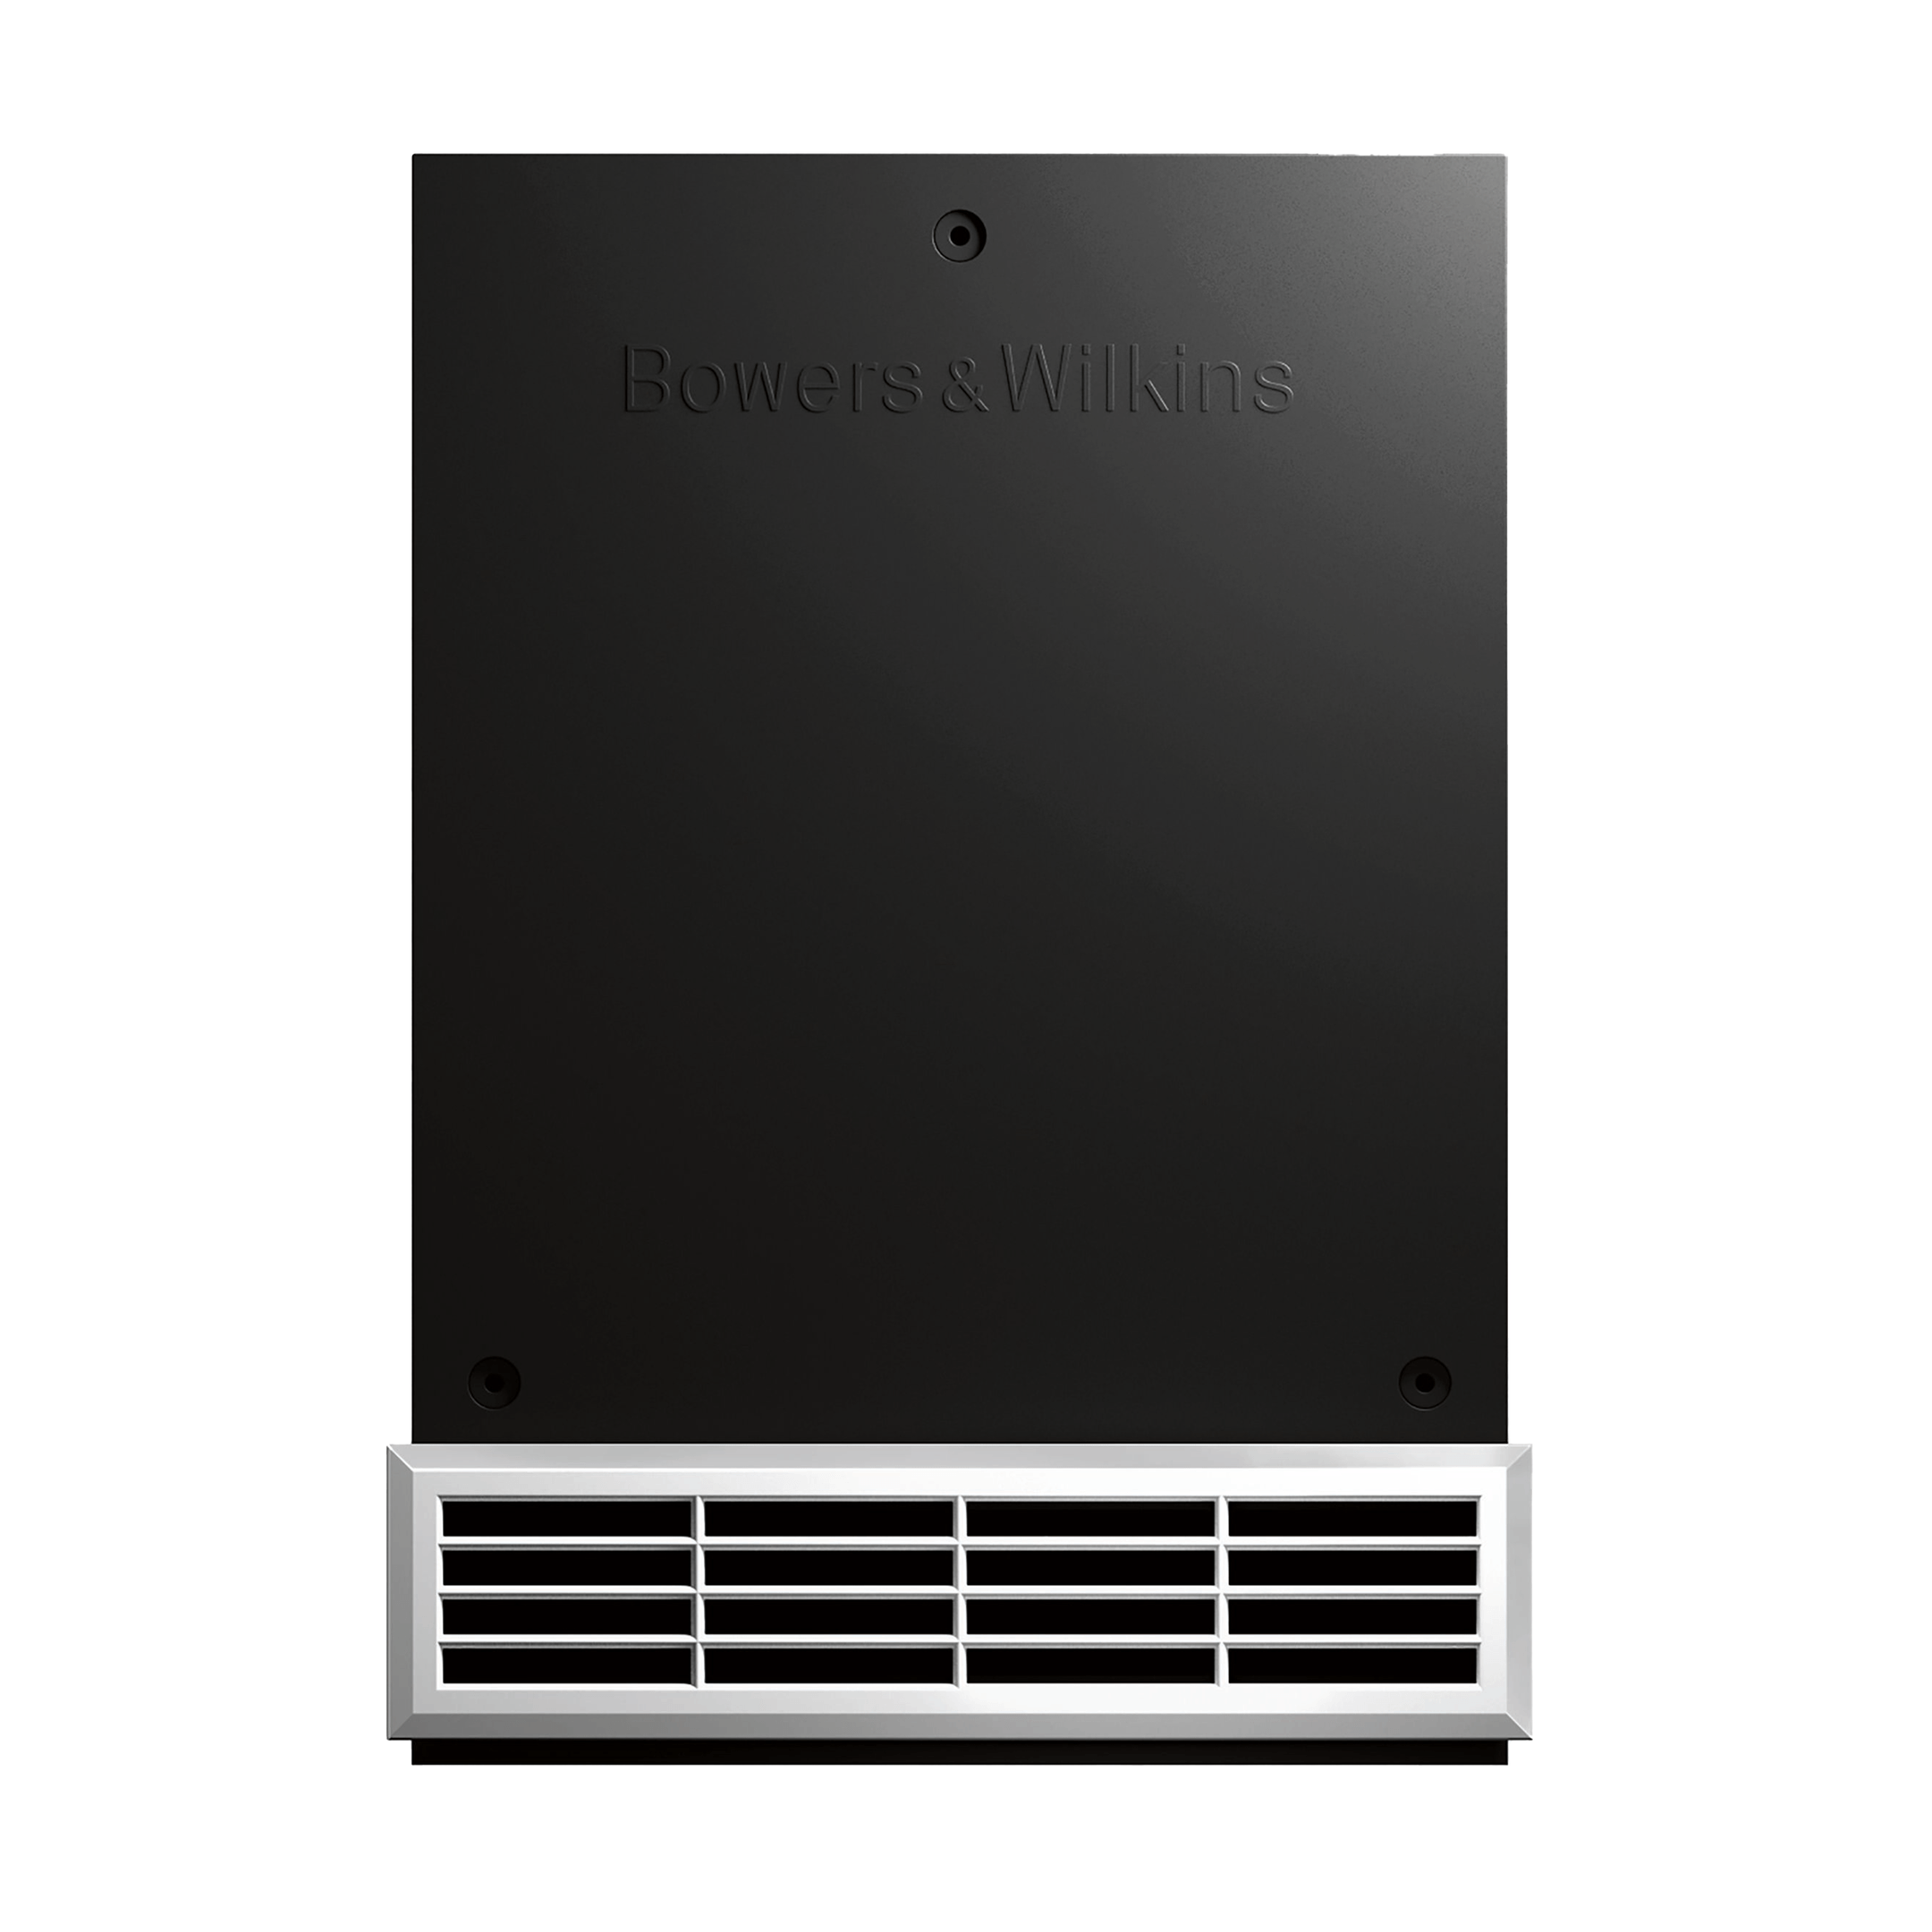 Bowers & Wilkins ISW3 - Primed white grille - FP31127